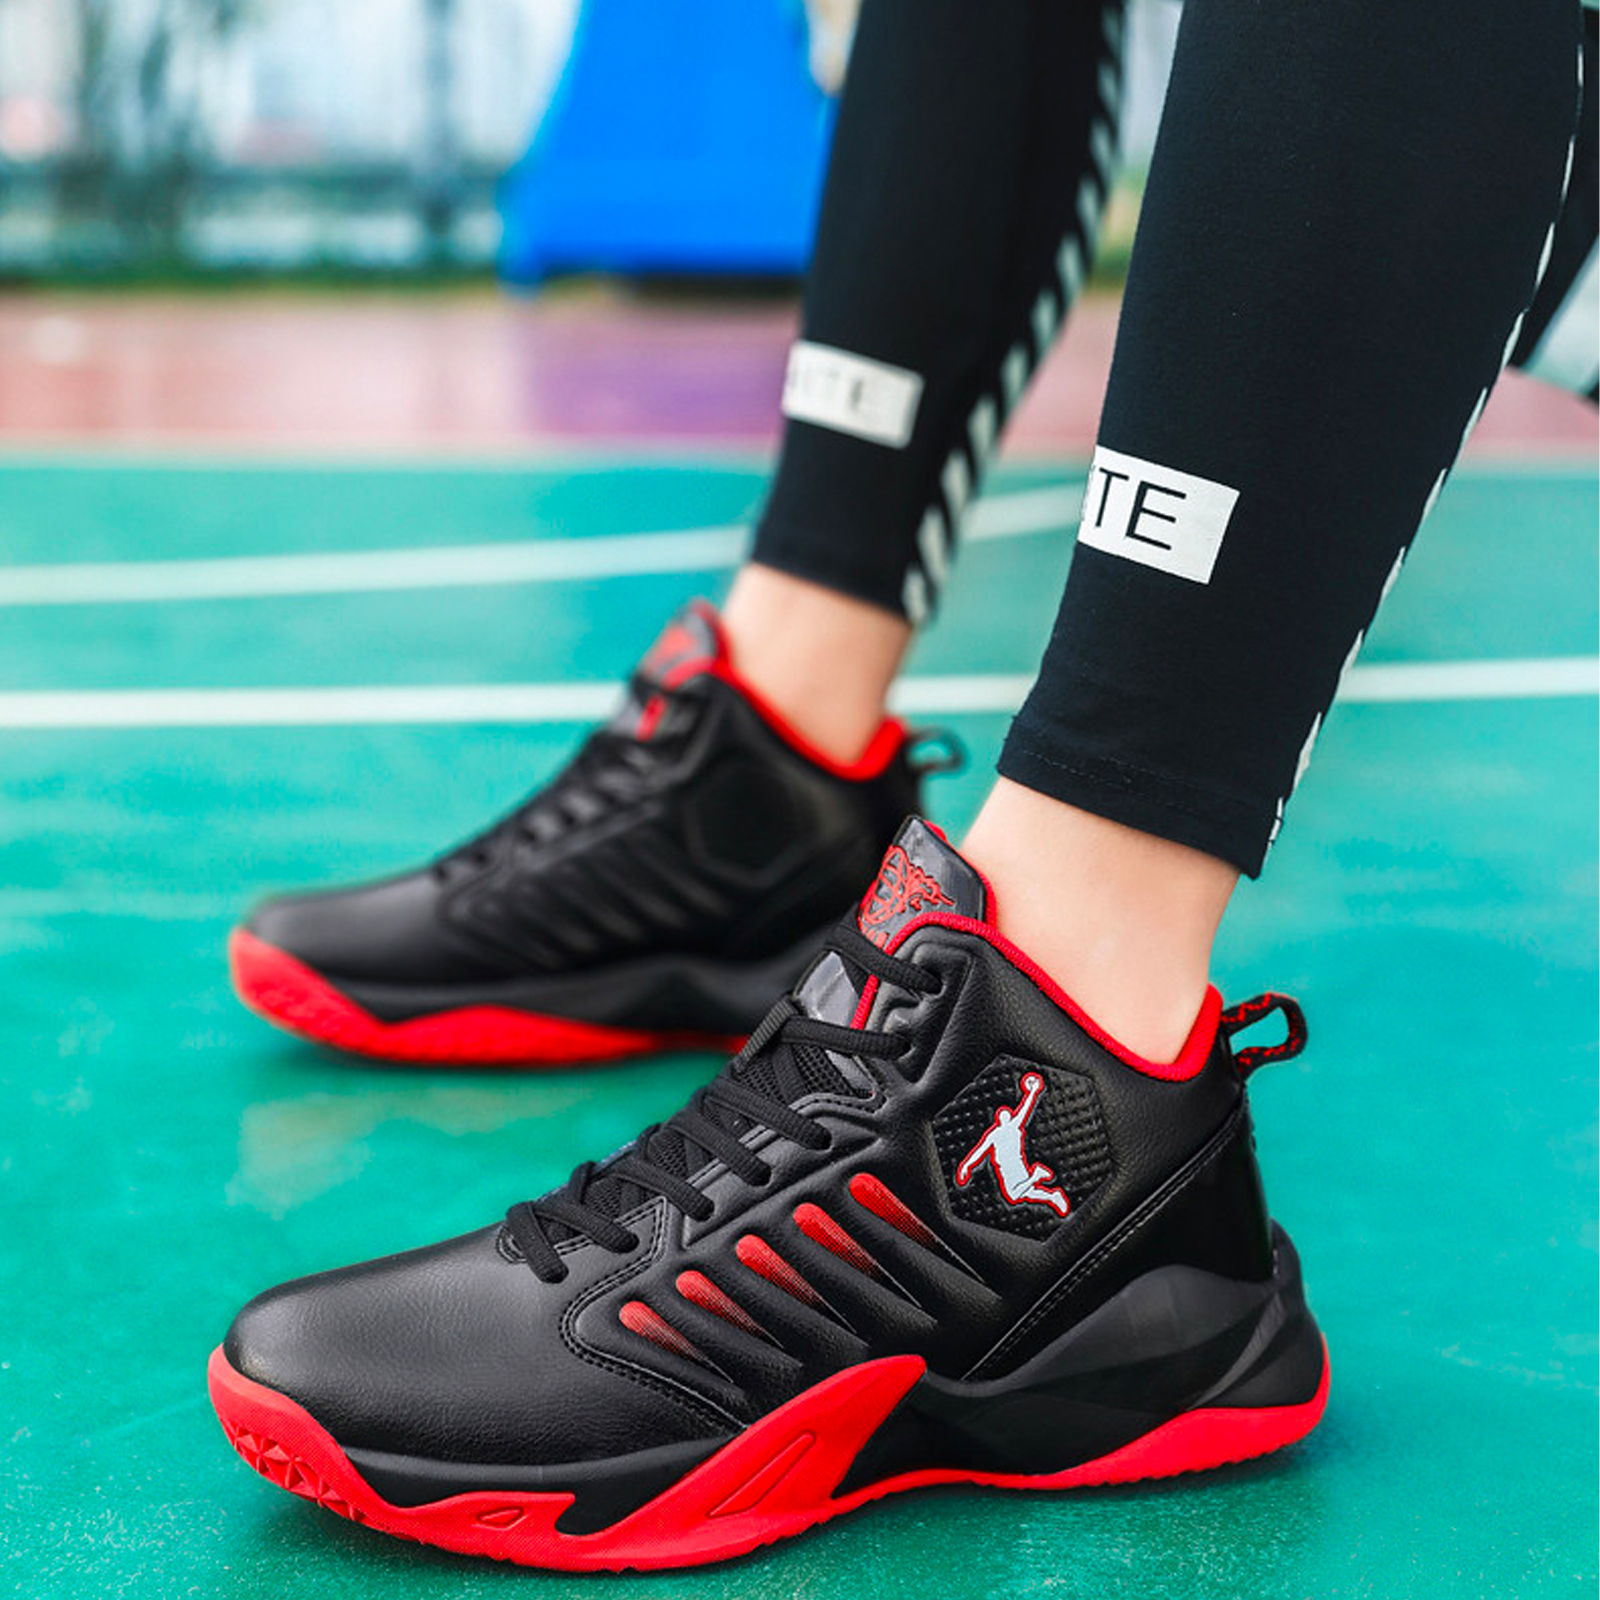 neumático años protestante Cheap Nike Jordan fakes from AliExpress that don't look bad at all. Sizes  from 36 - 46 and delivery within 15 days | China Planet